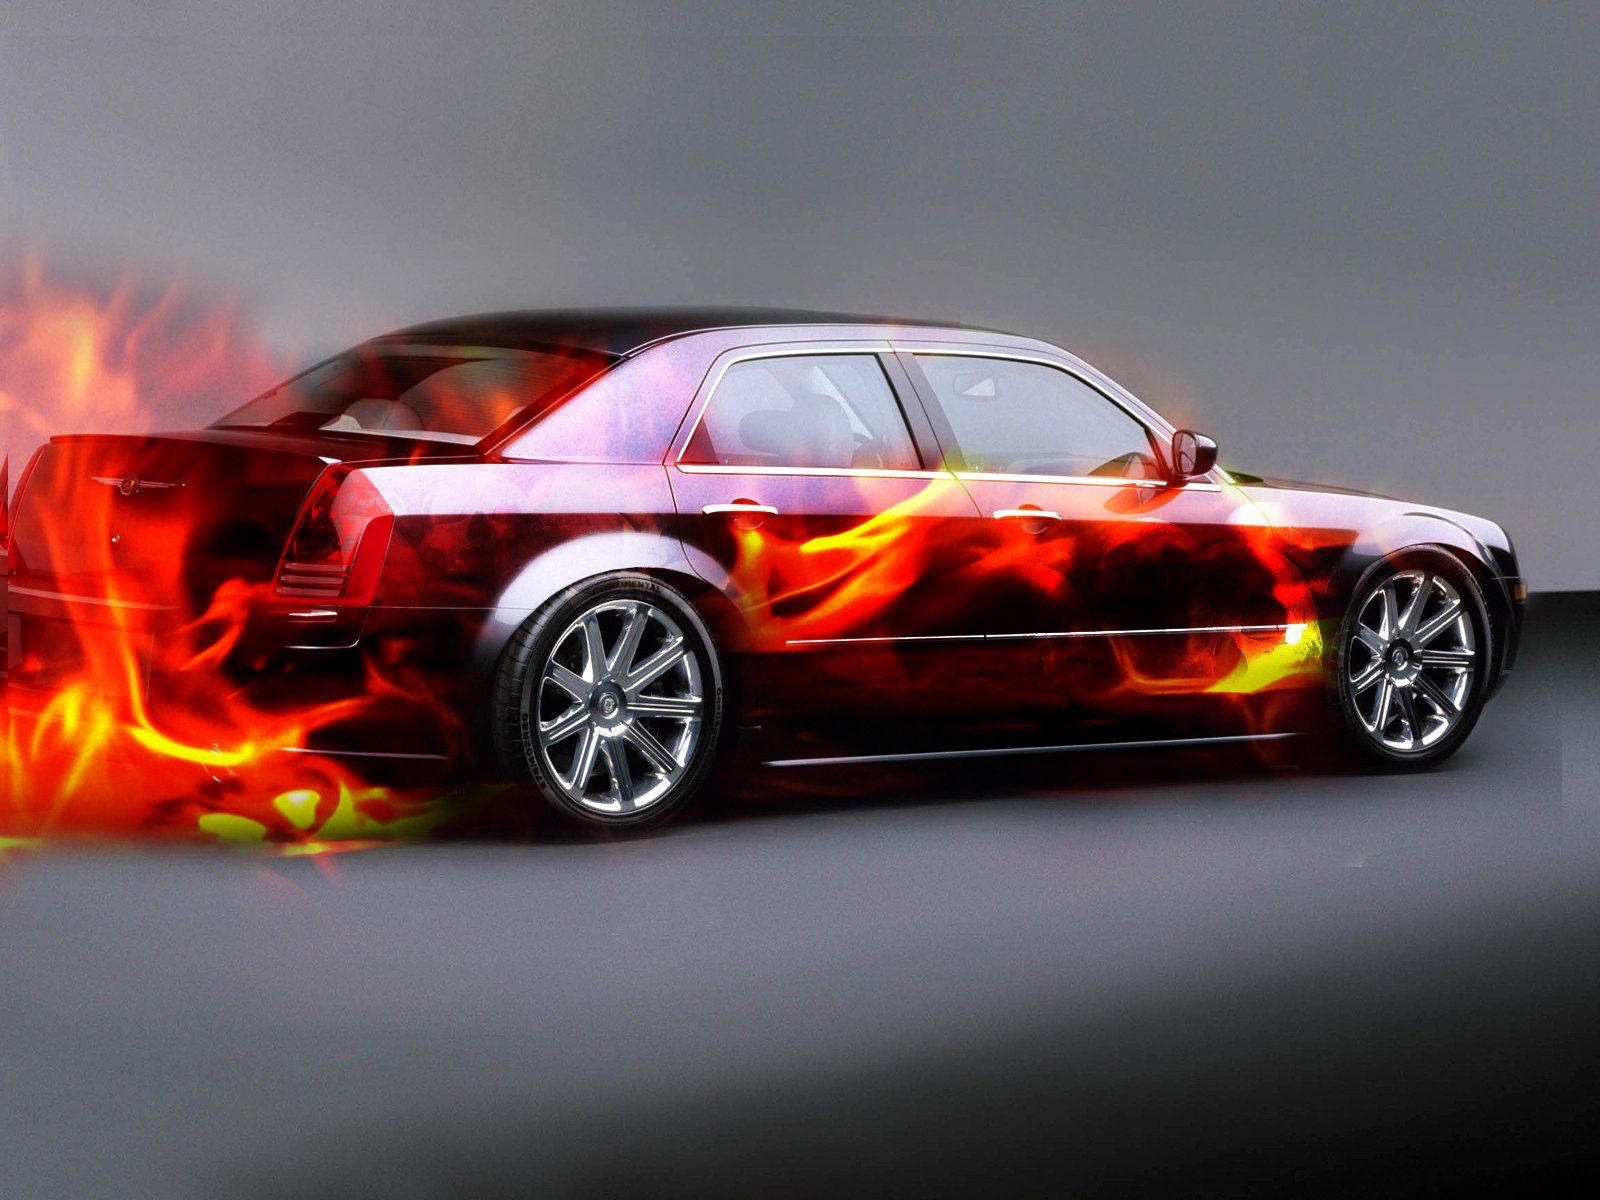 Red Hot Cars Wallpapers